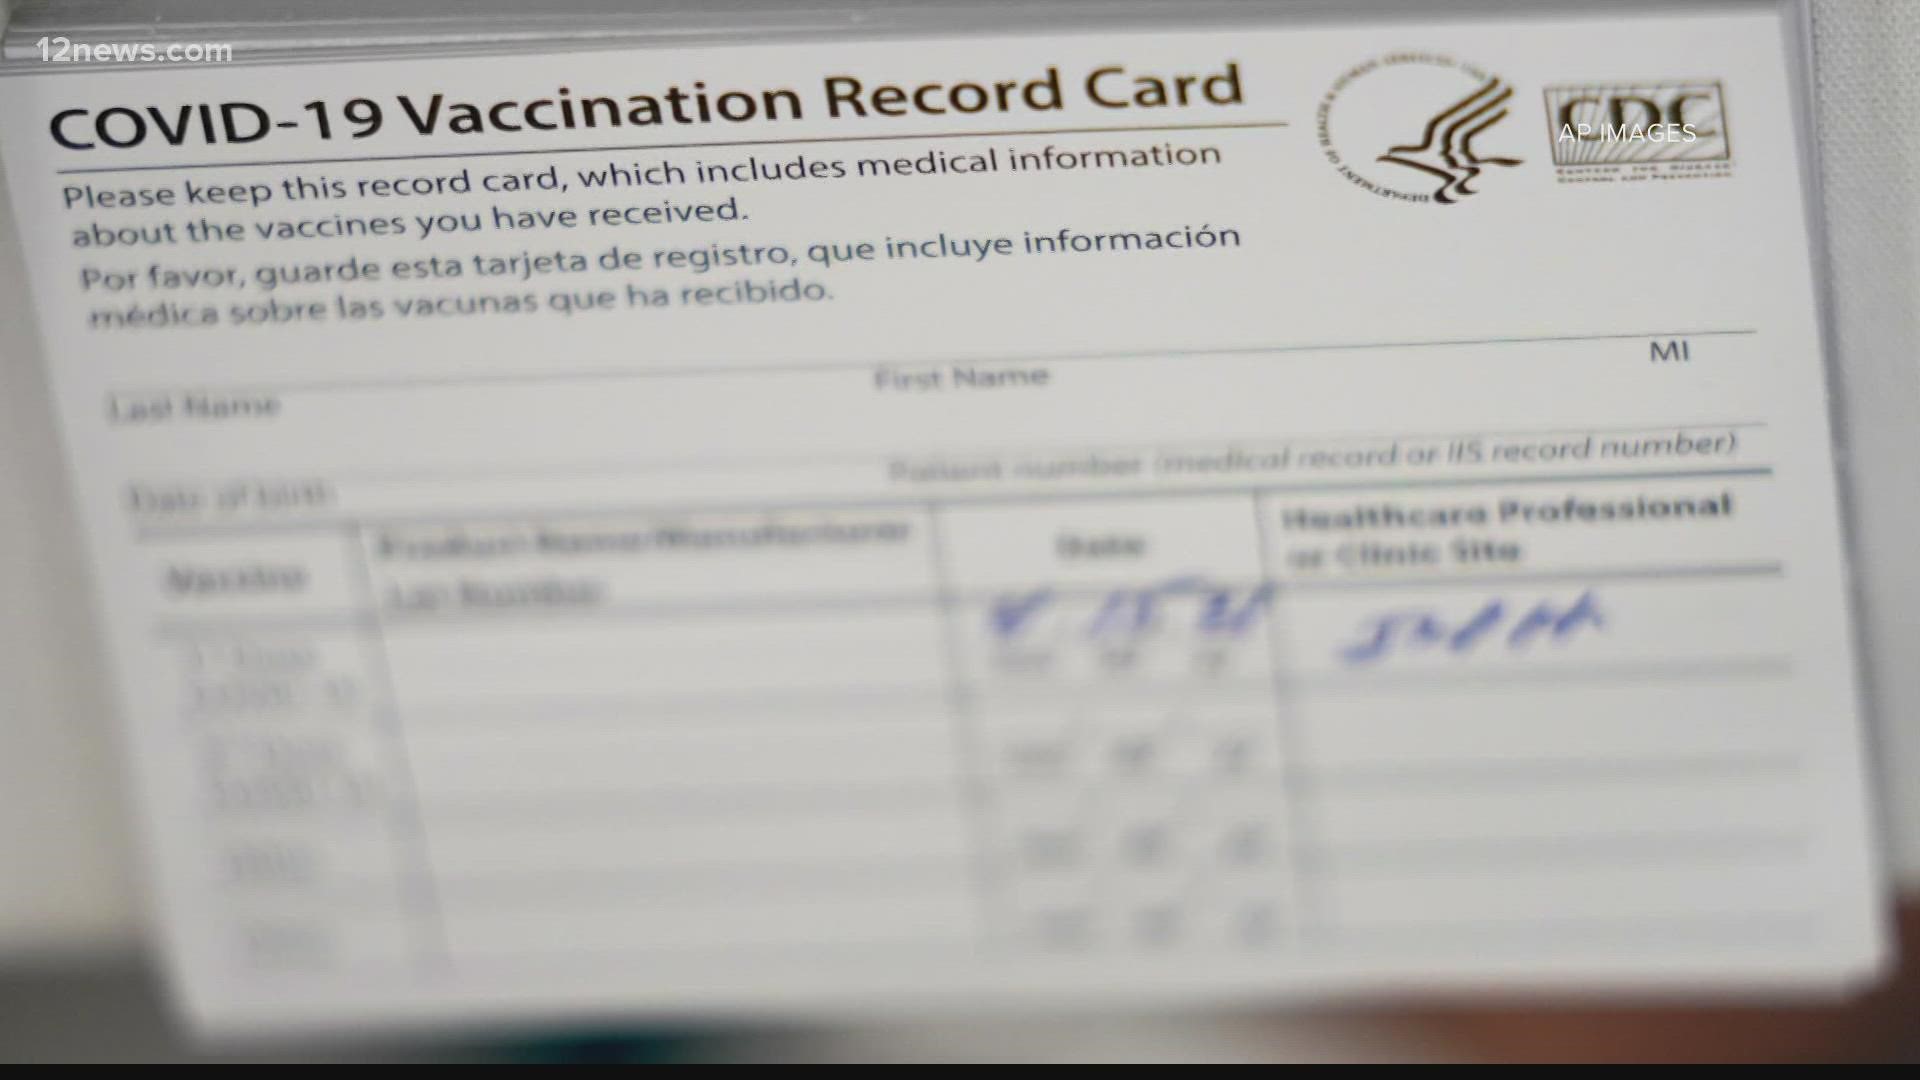 Is asking for your COVID-19 vaccination card illegal or a HIPAA violation? Michael Doudna verifies the answer.